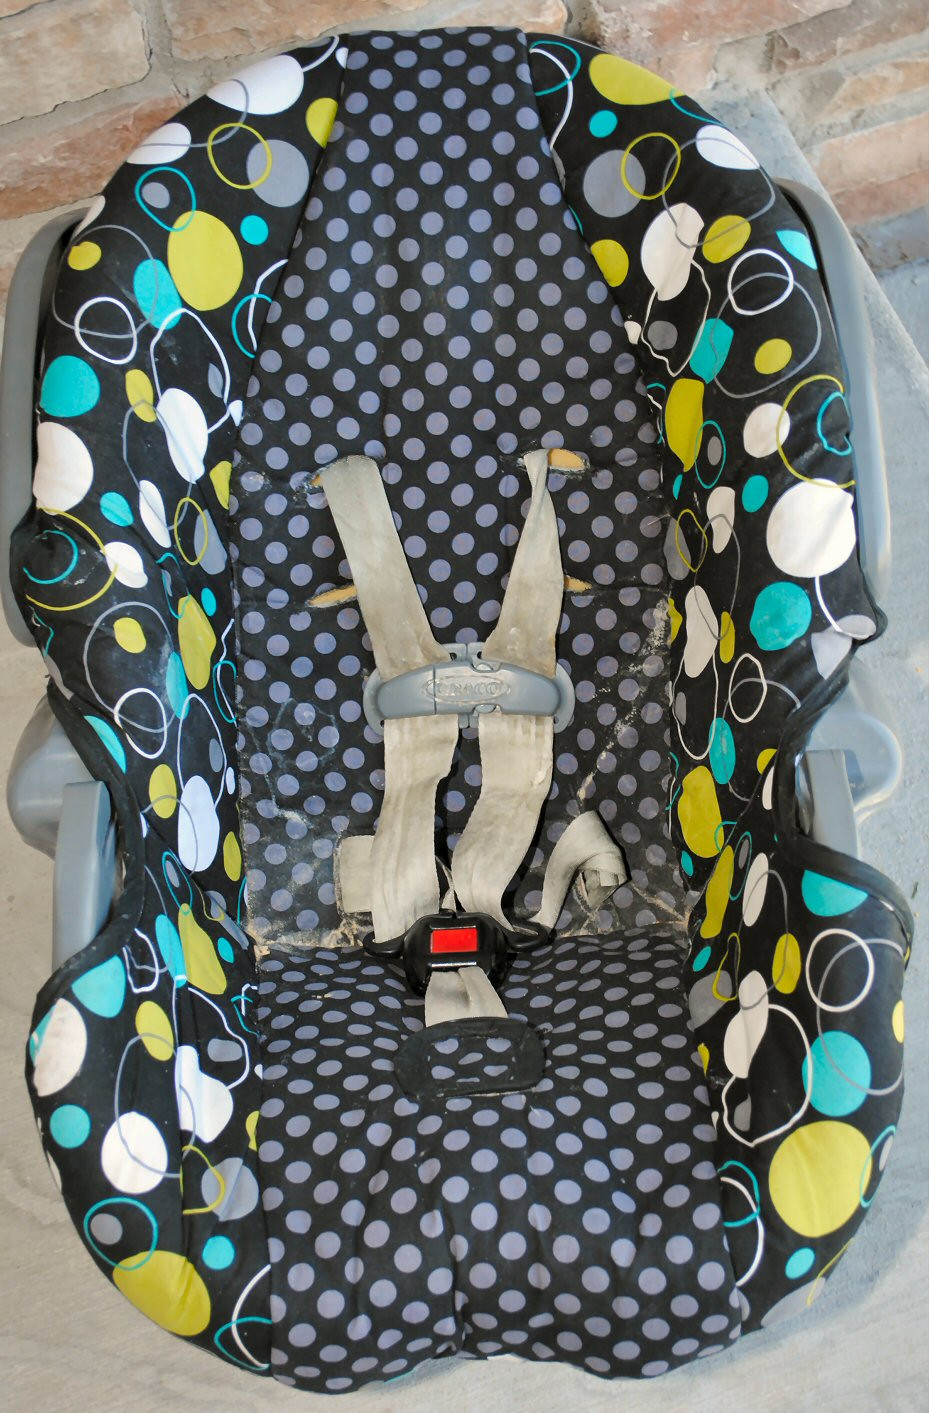 DIY Baby Car Seat Cover
 Infant Toddler Car Seat Cover Tutorial How to Cover a